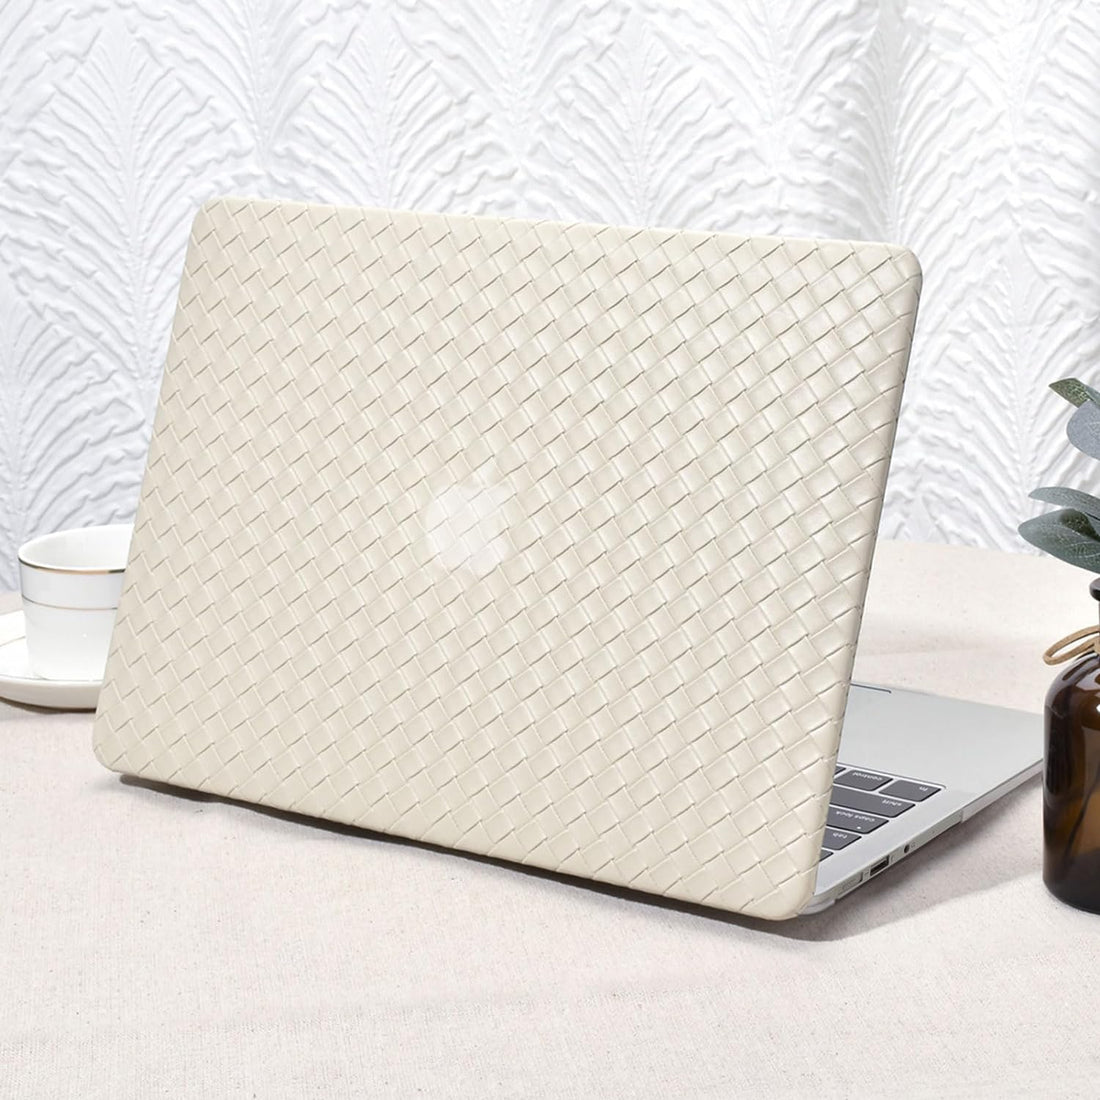 Seorsok Compatible with Old Version MacBook Air 13.3 inch Case Models A1369 & A1466(2010-2015 2017) Release,Elegant Leather Plastic Hard Shell Case Transparent Keyboard Cover,Beige Tartan PVC